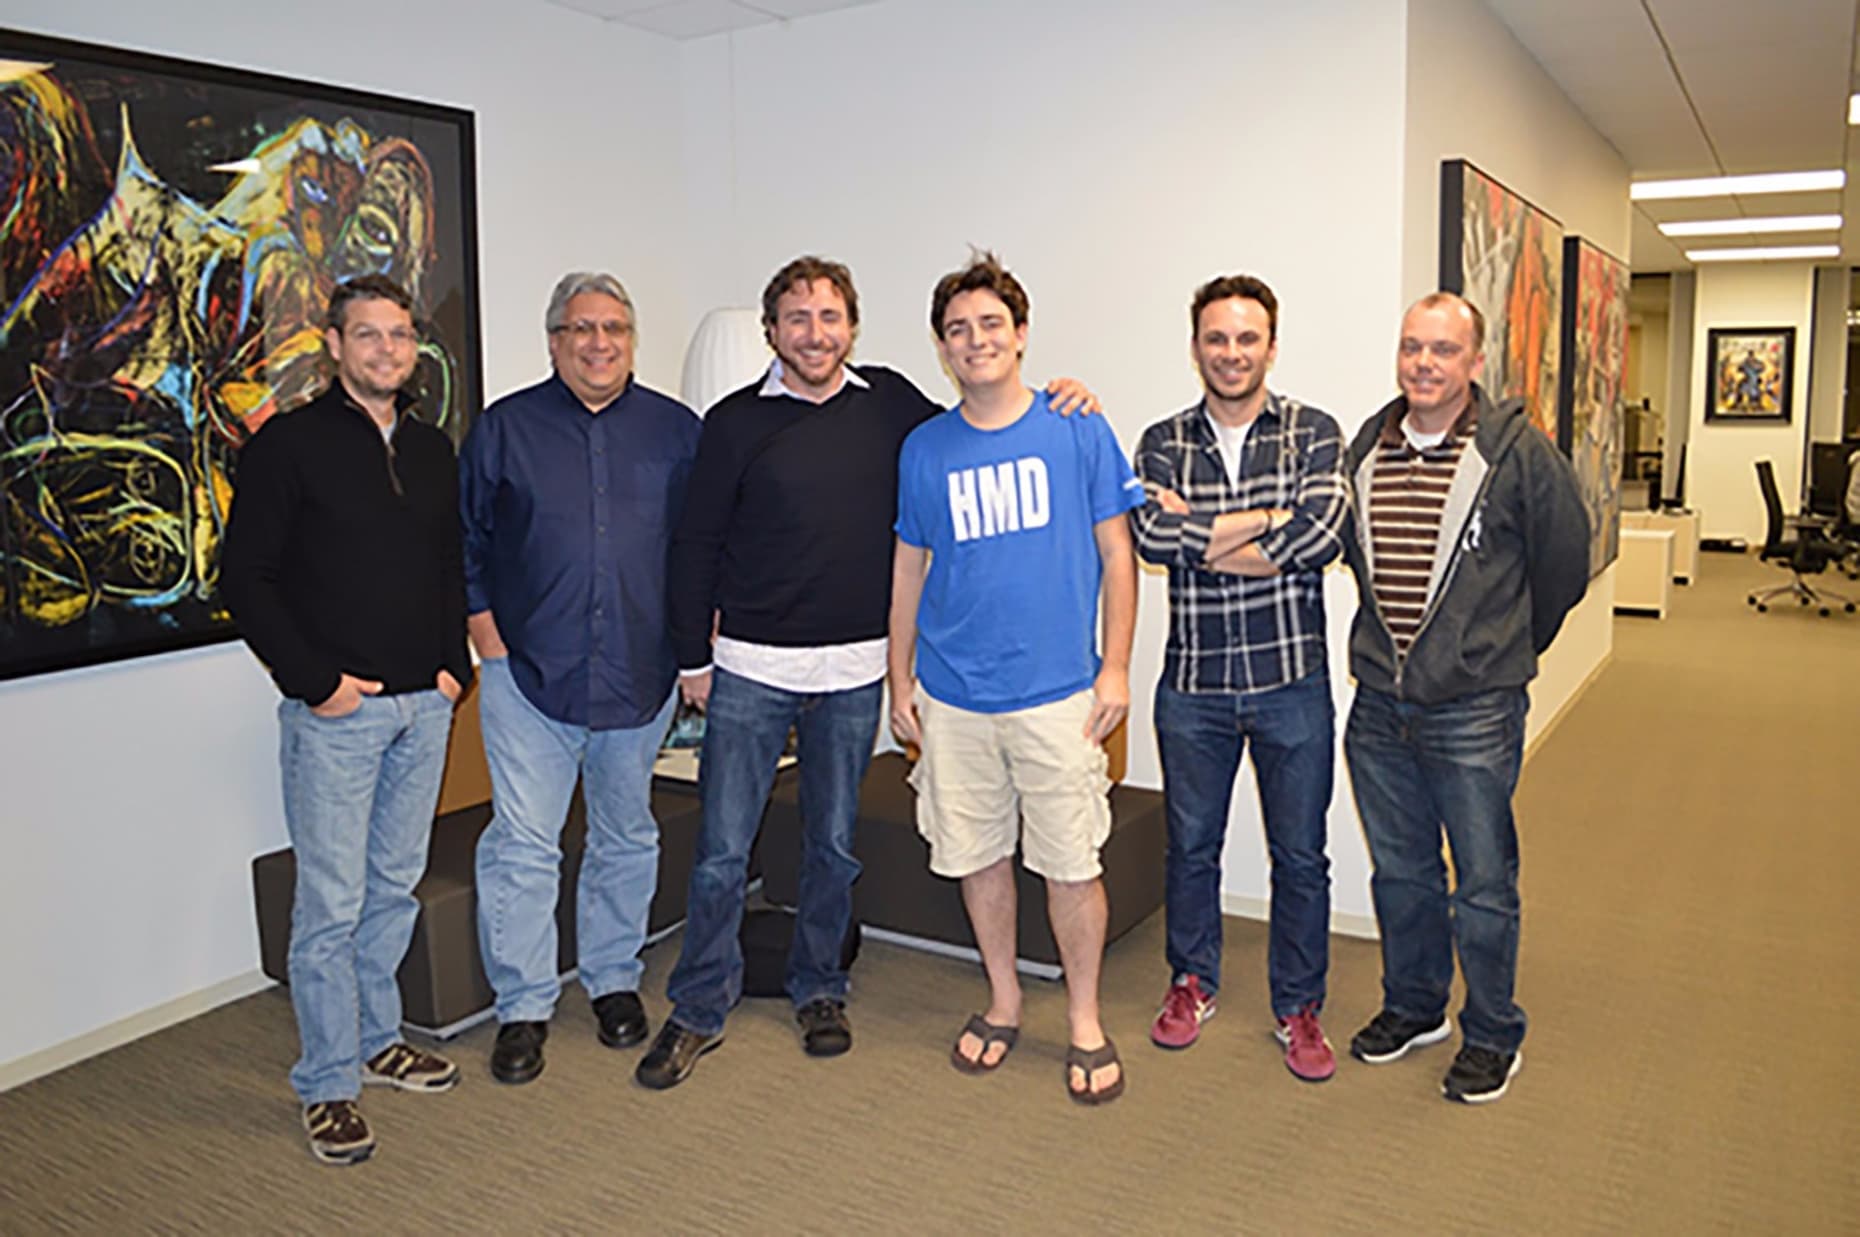 Paul Bettner and some of the team at Playful visit the Oculus headquarters in 2012. (Photo Credit: Oculus)